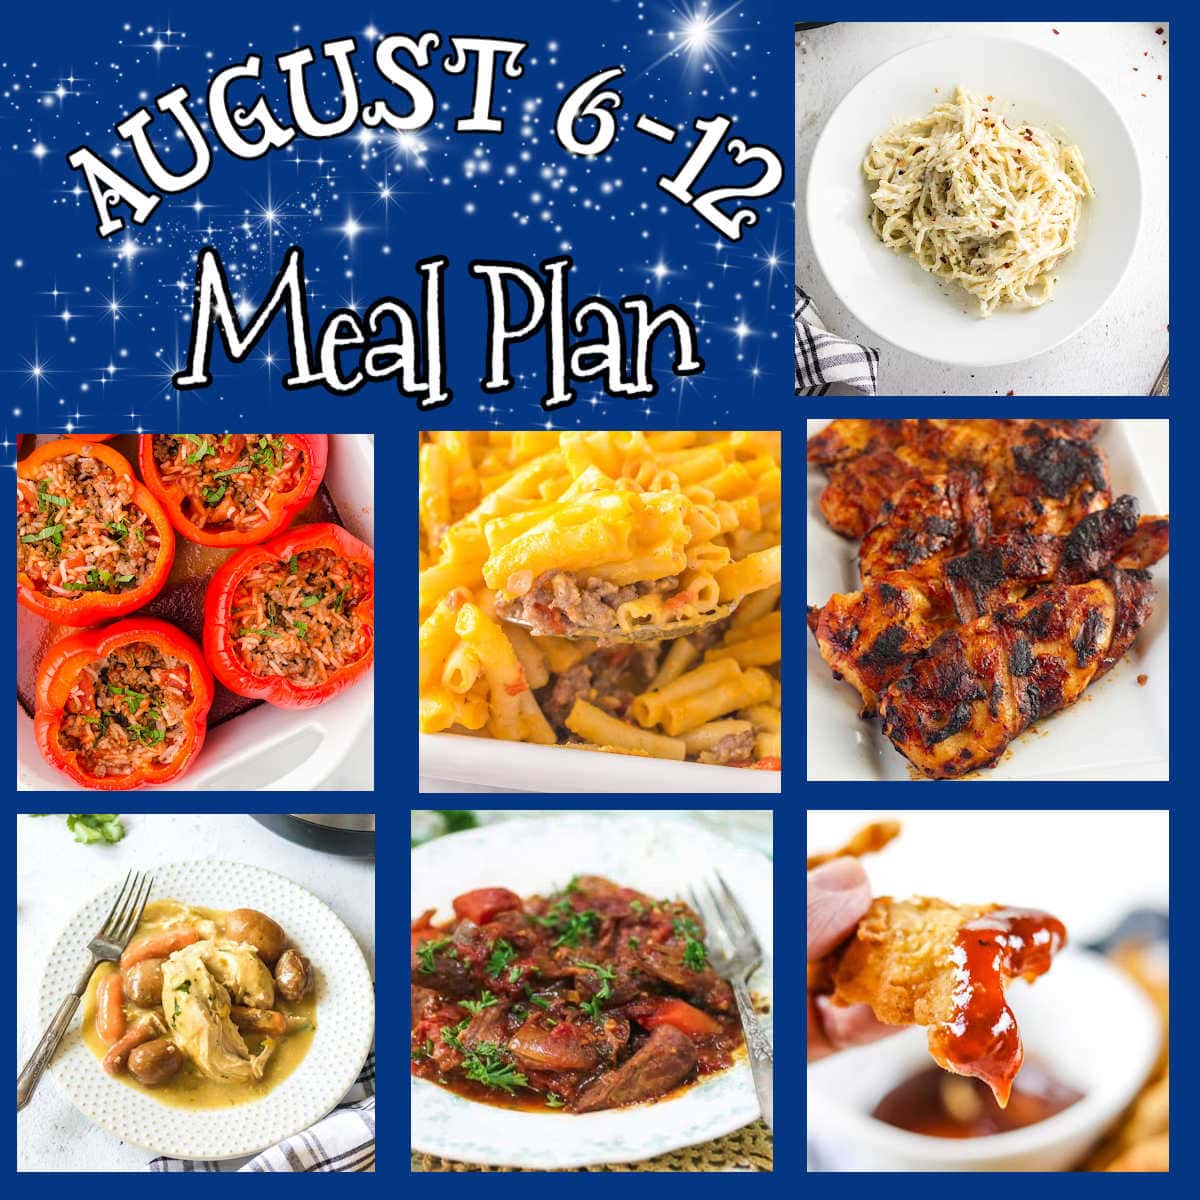 Collage of images from this week's meal plan.